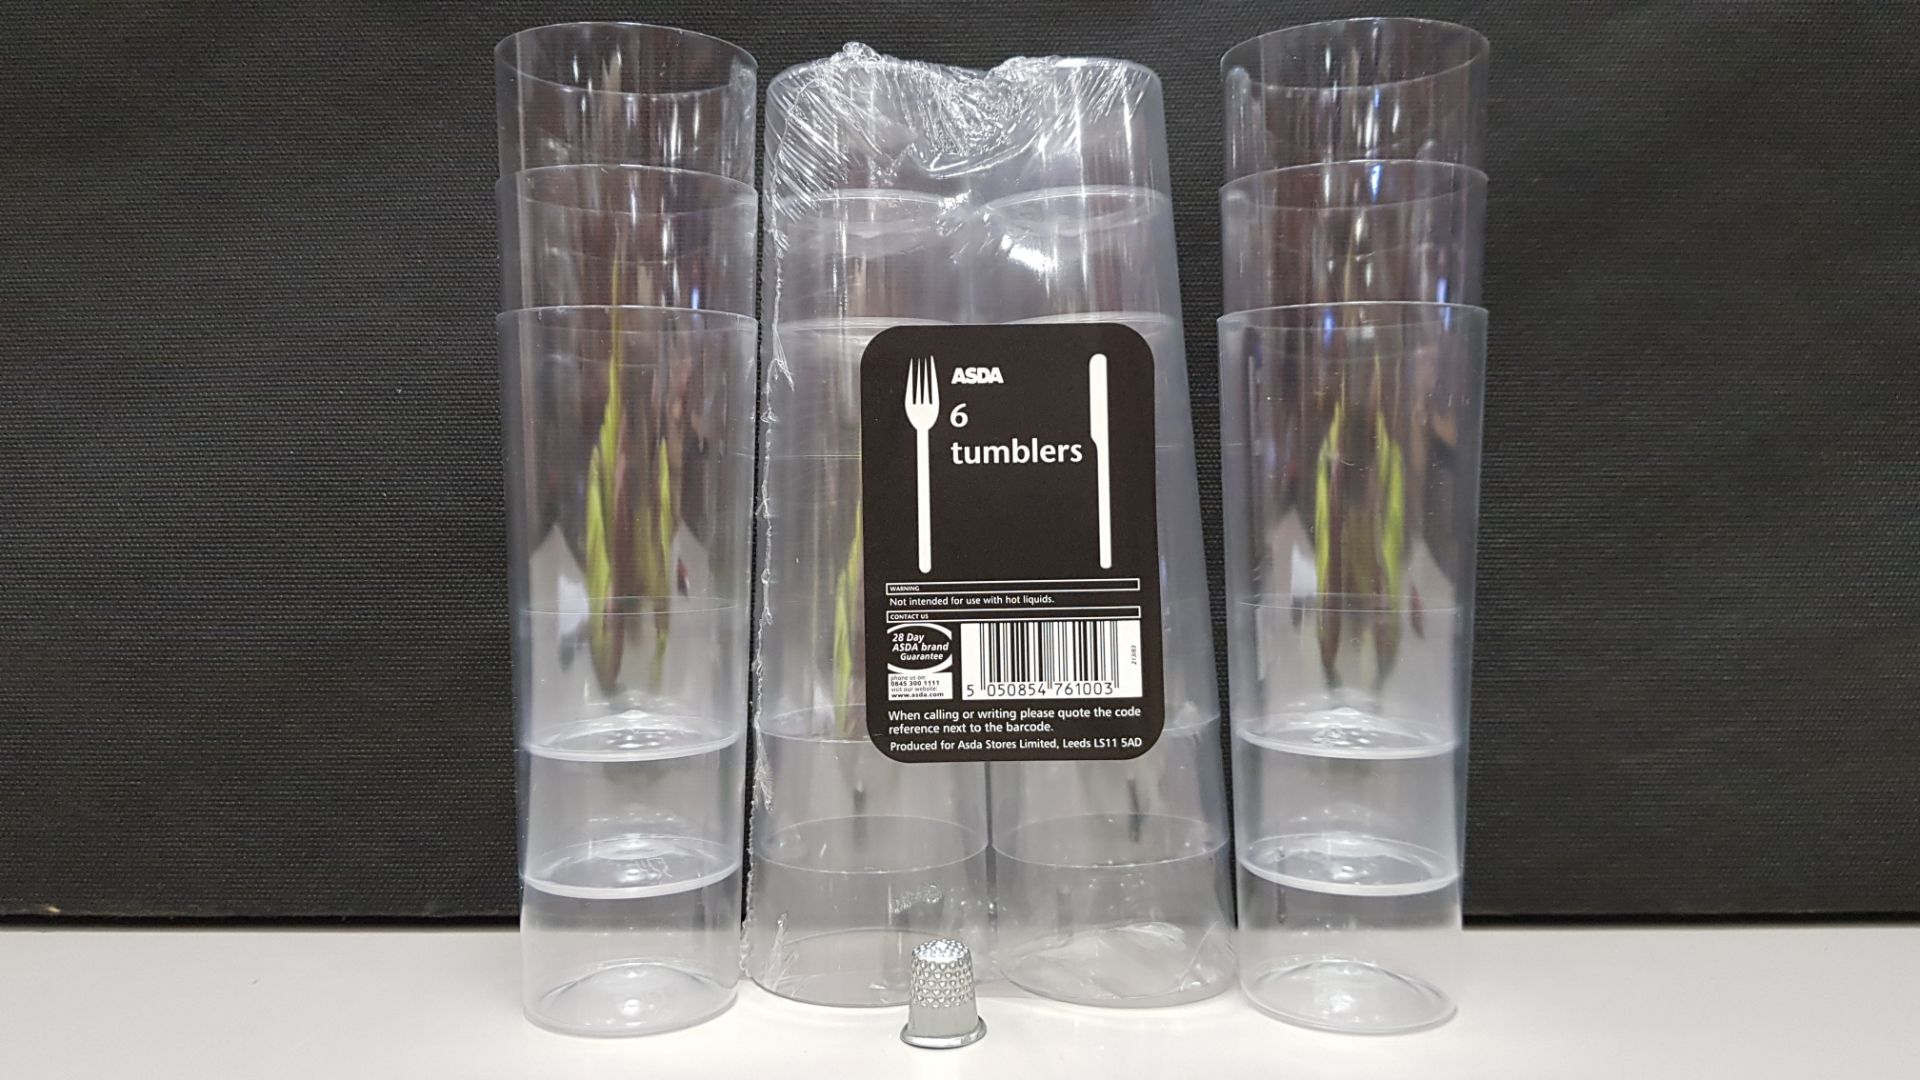 640 X BRAND NEW PACKS OF 6 HIGH BALL SLIM JIM CLEAR PLASTIC TUMBLERS IN 160 DISPLAY BOXES - ON 1